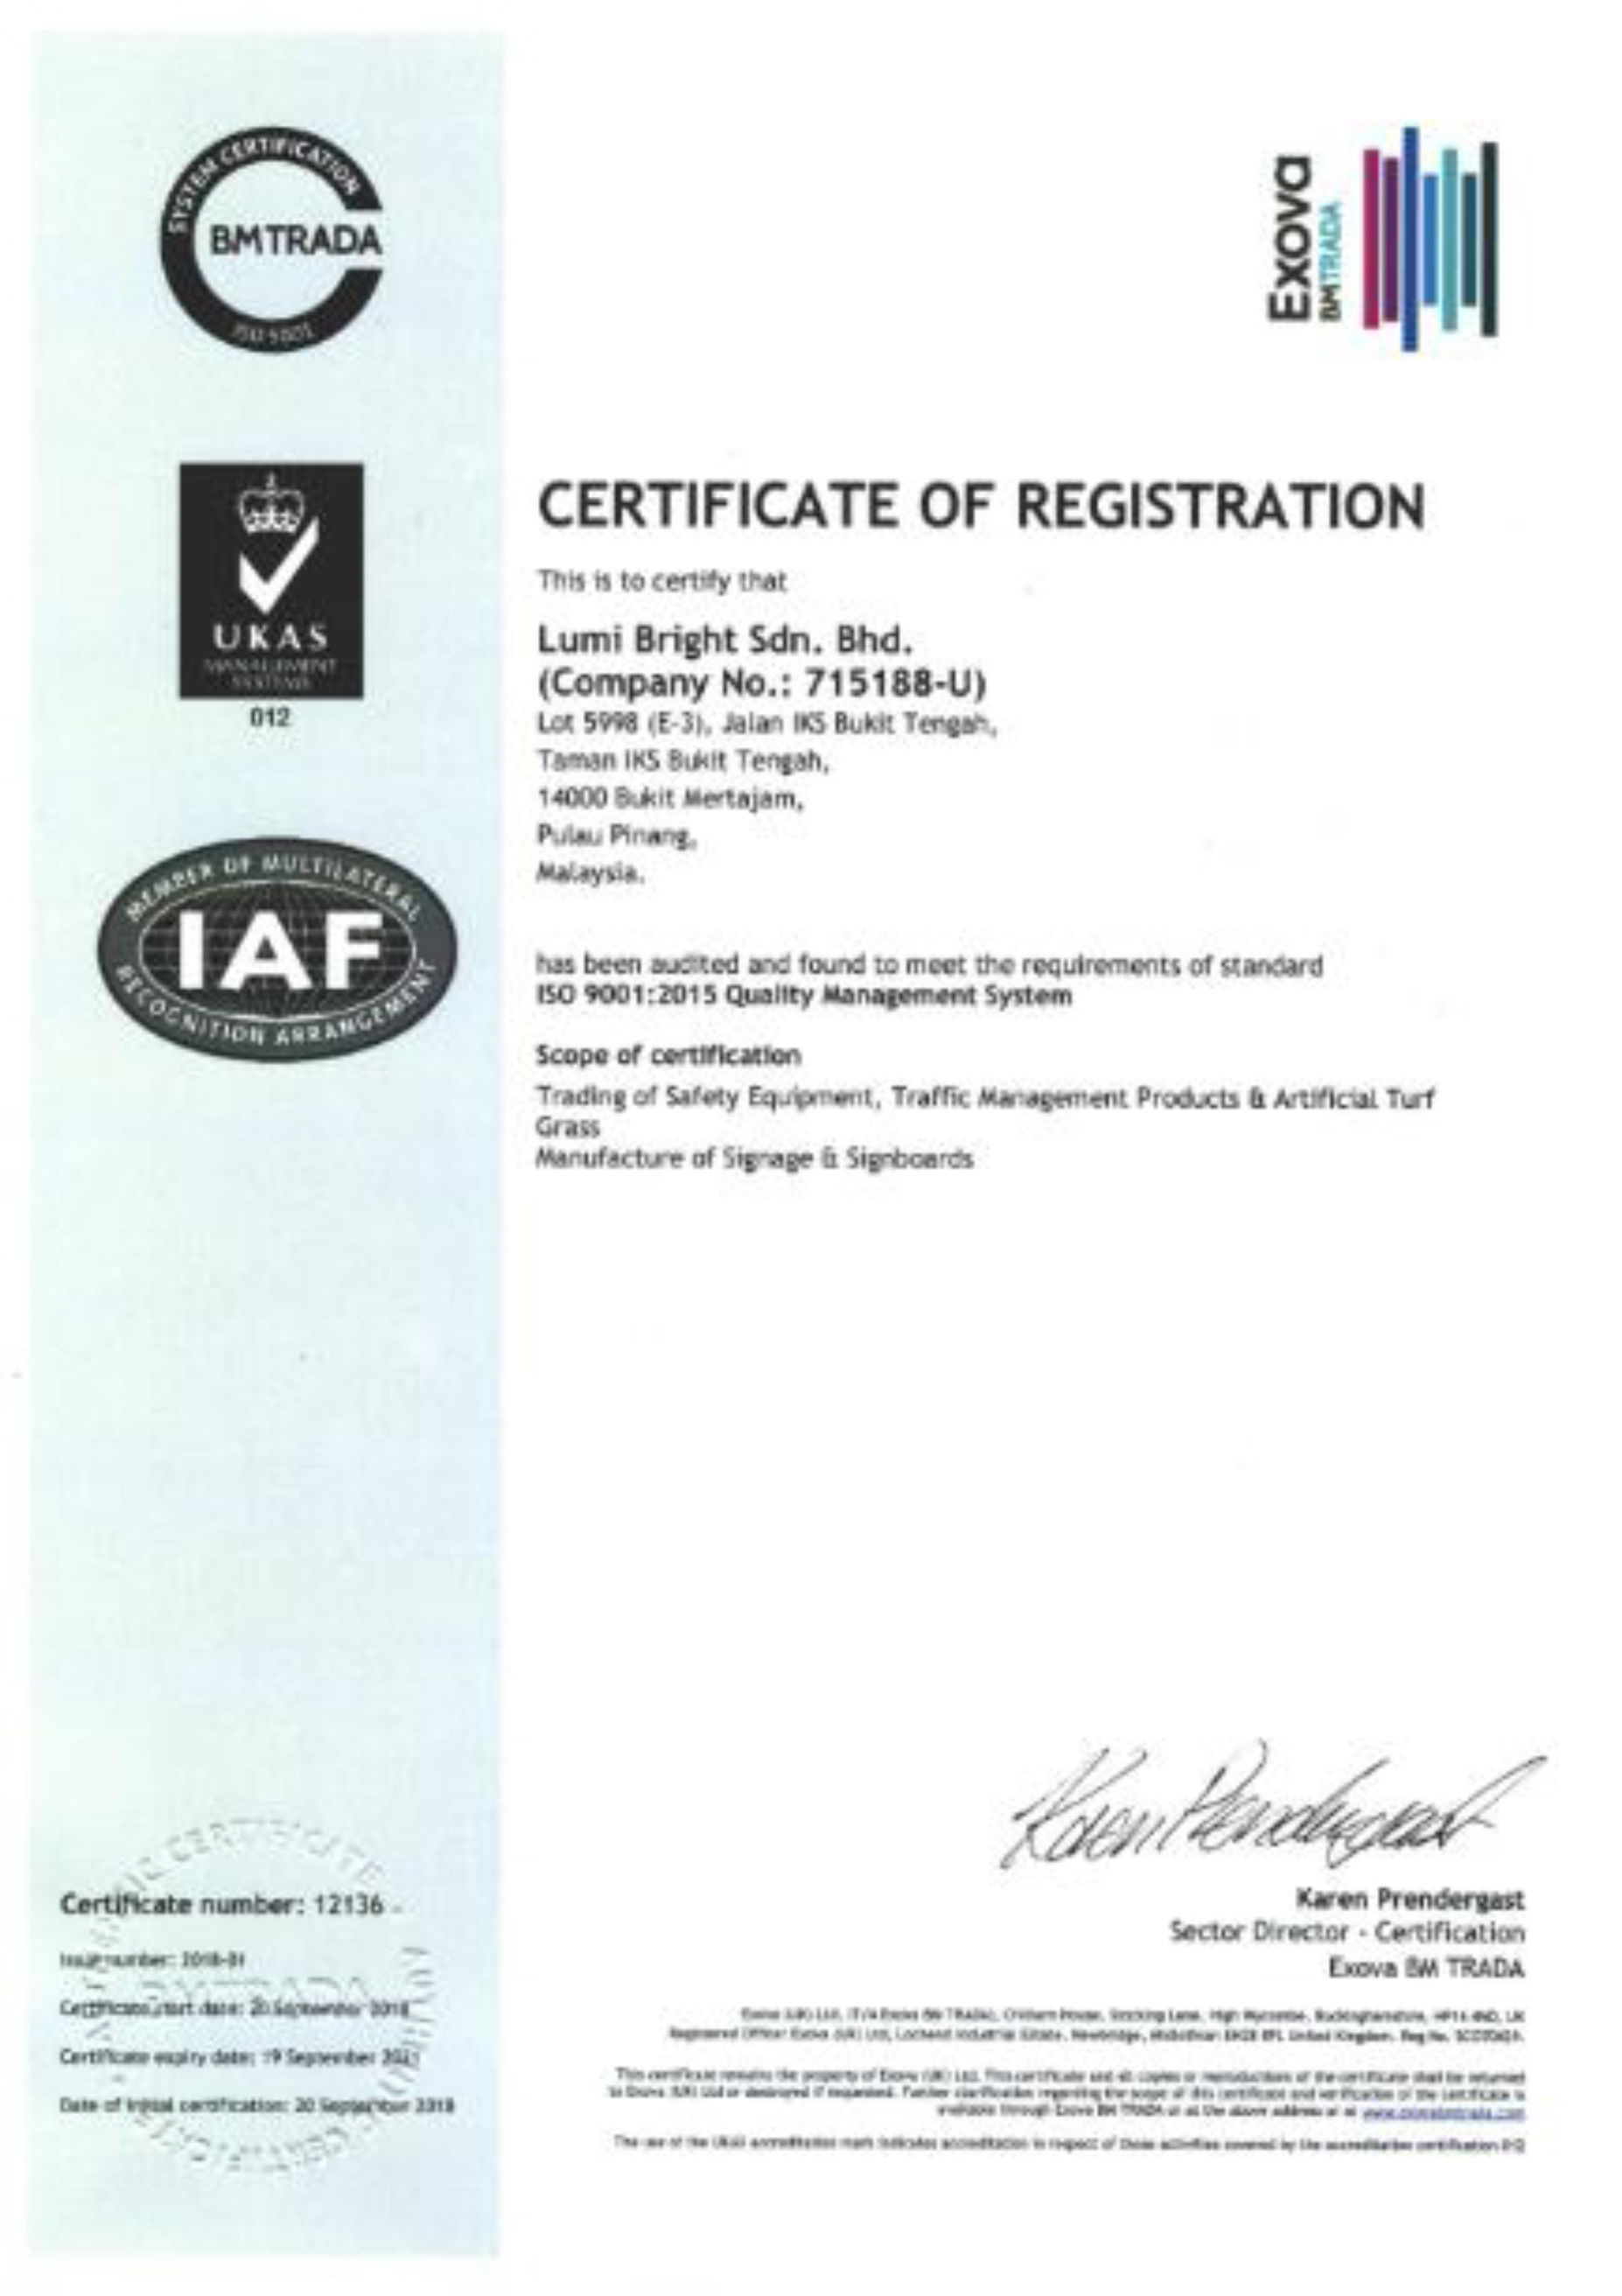 Certification of Registration for ISO 90012015 on Quality Management System